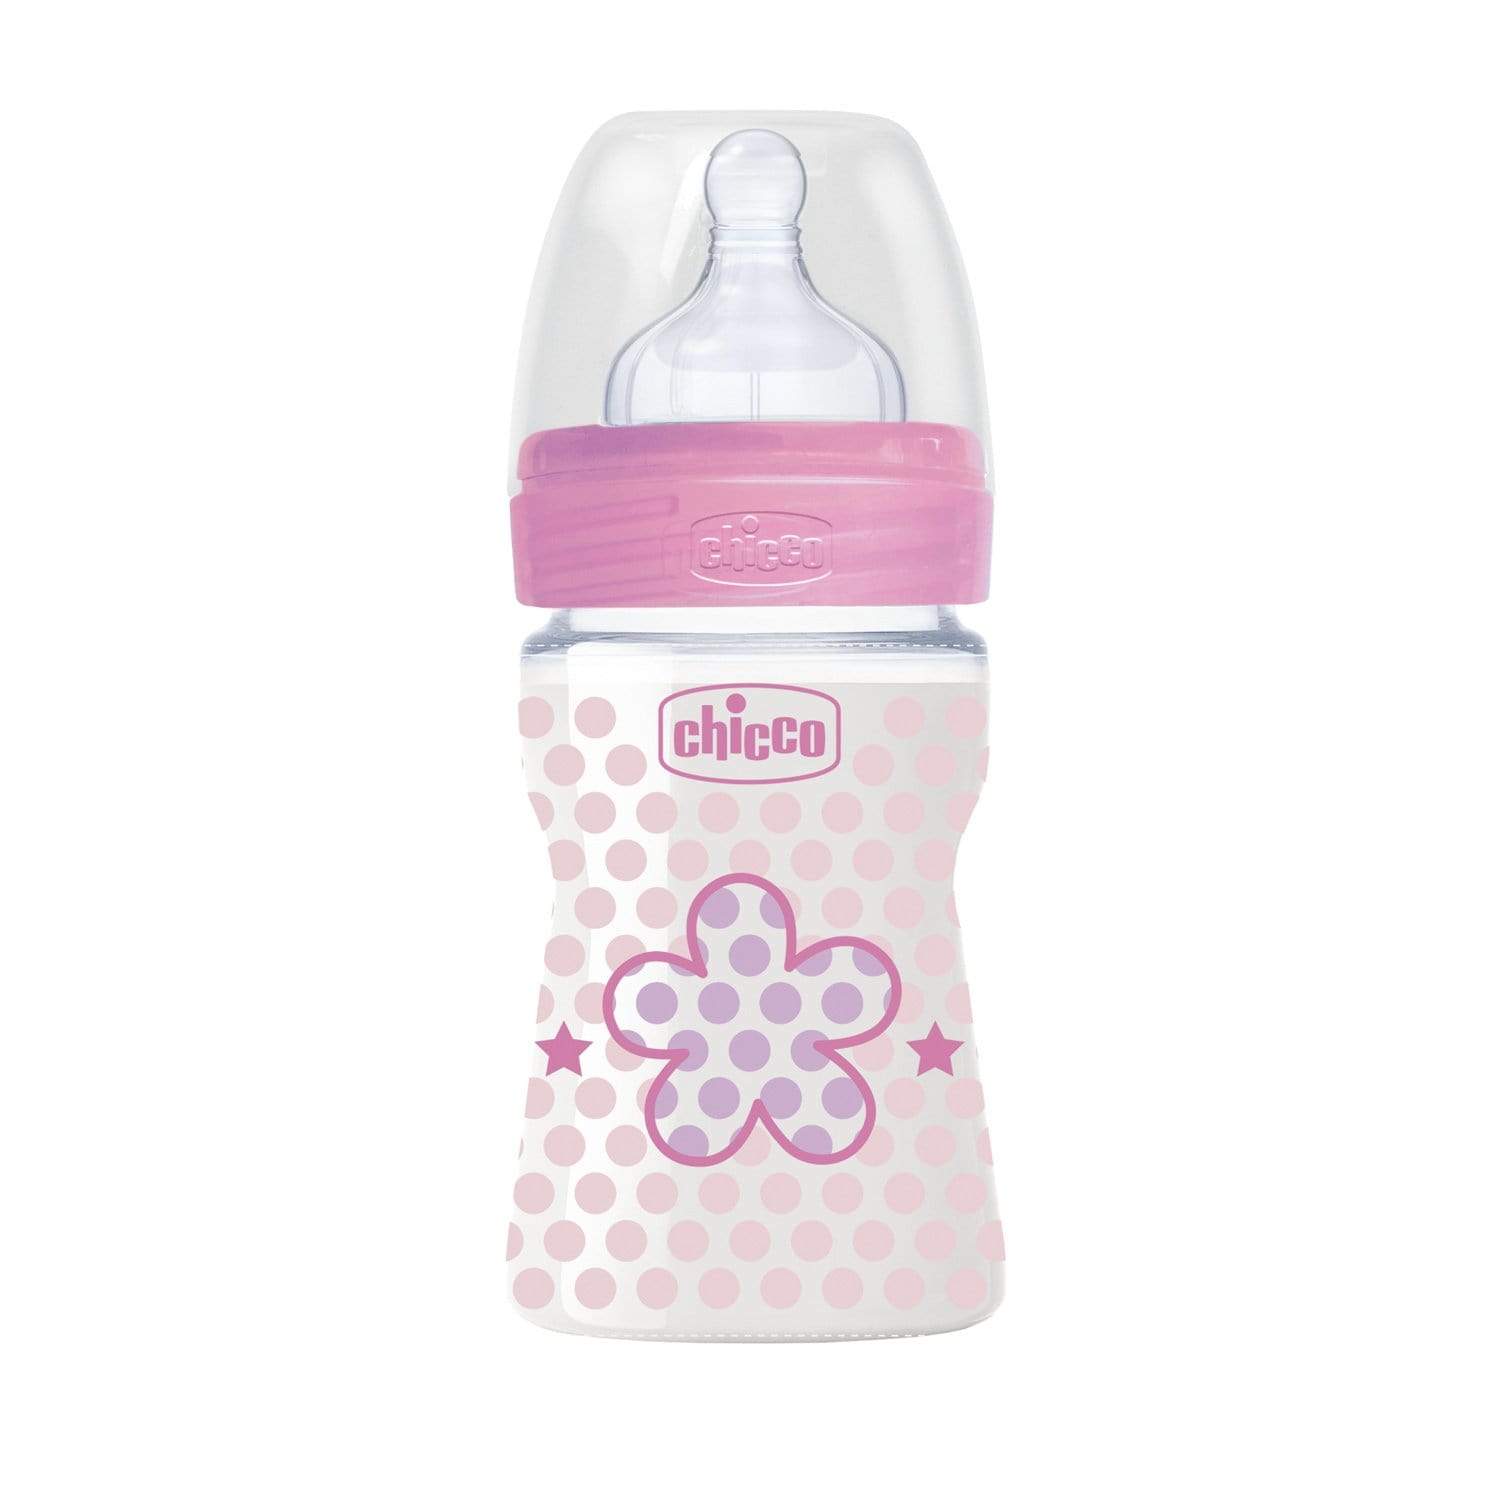 WELL BEING BOTTLE - 150ML REGULAR FLOW GIRL SILICONE